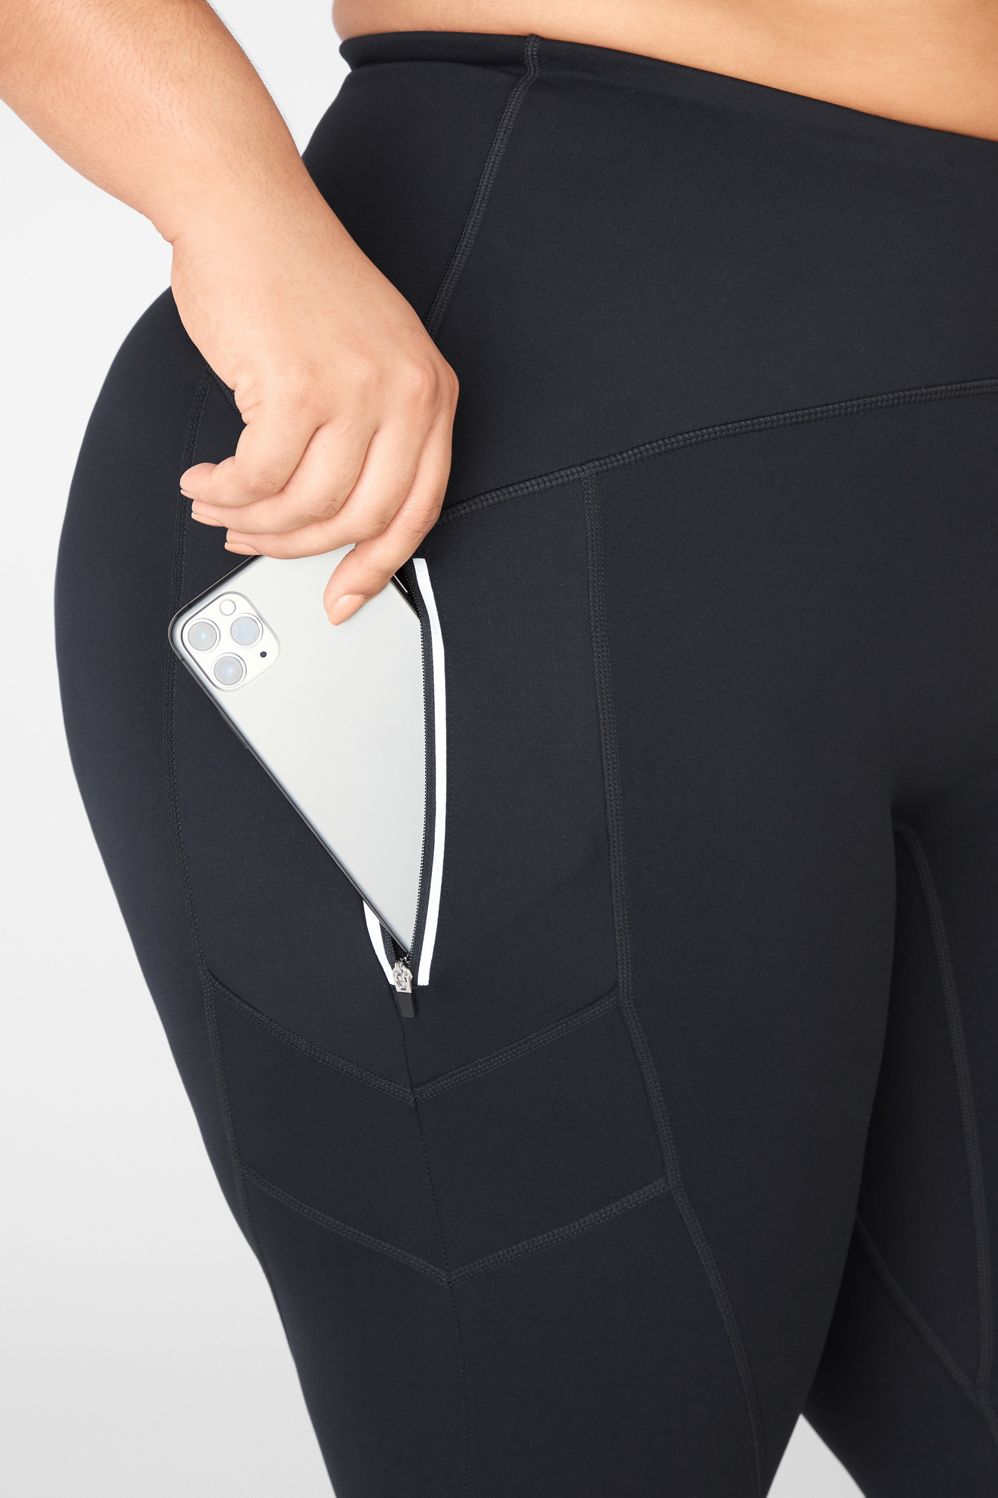 Fabletics Motion 365 Legging Size XS - $28 - From Shyane